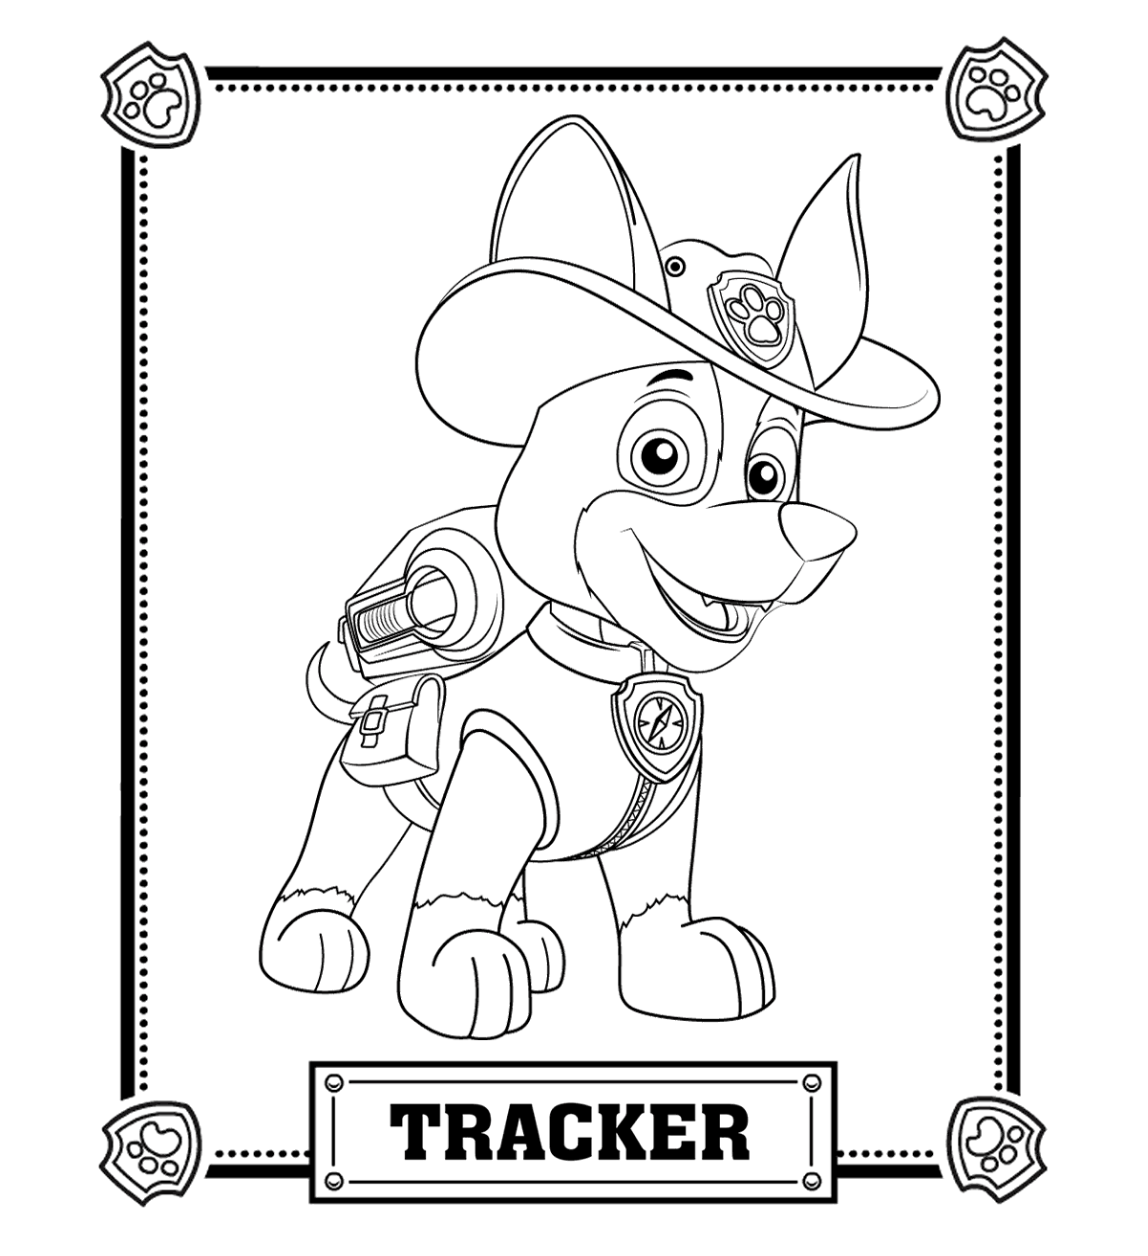 colouring pages paw patrol tracker - Art